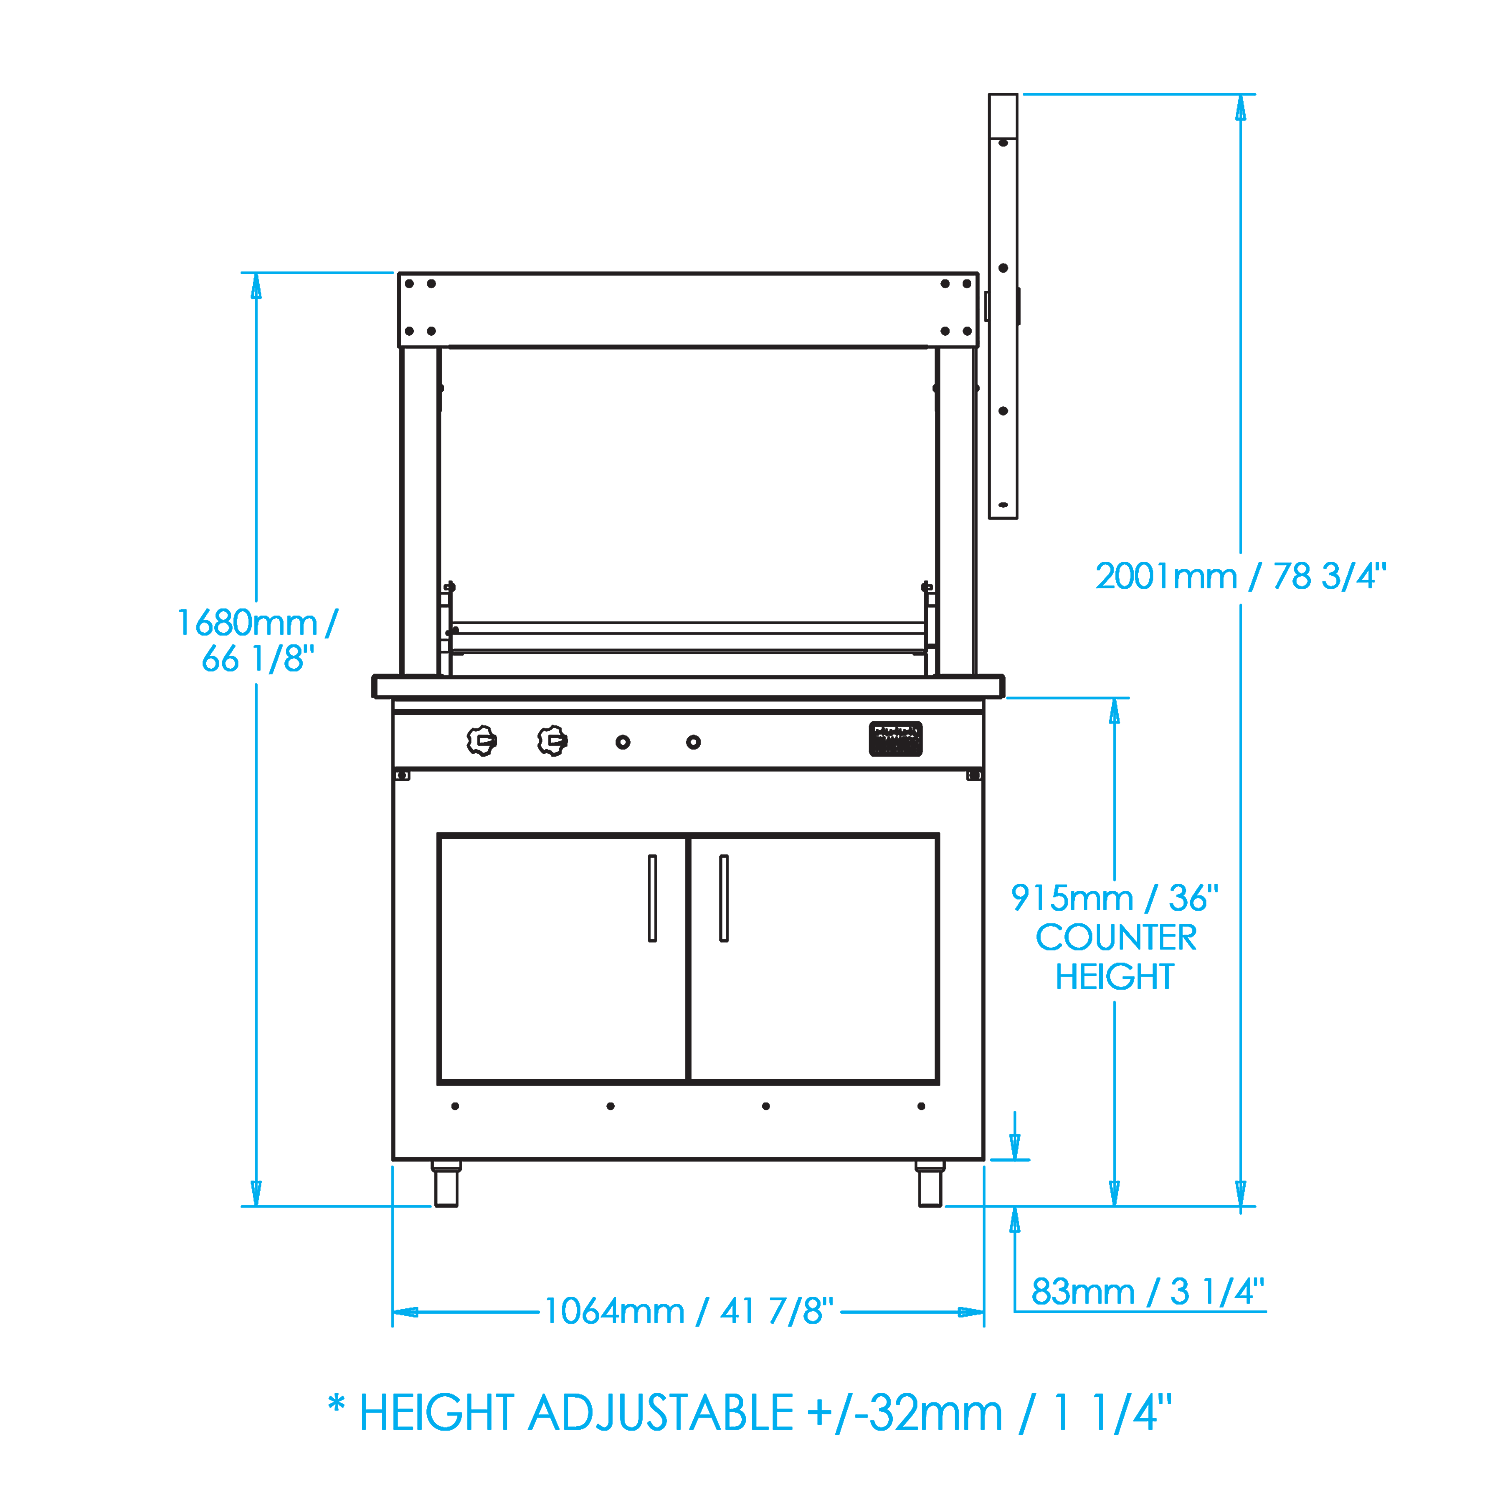 K750 Built-in Gaucho Grill Dimensions Image